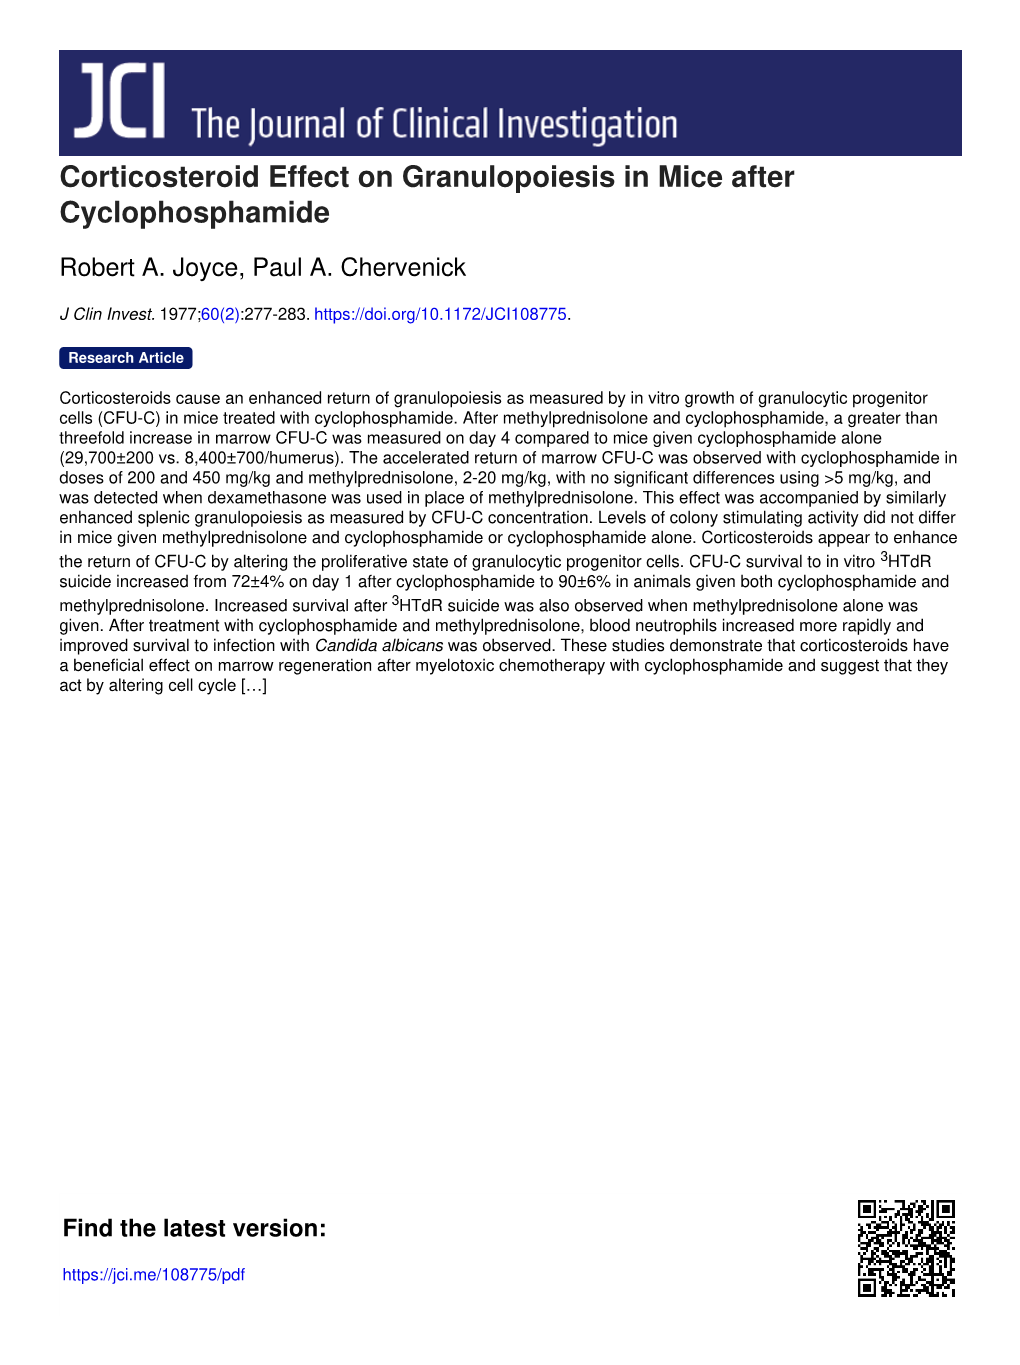 Corticosteroid Effect on Granulopoiesis in Mice After Cyclophosphamide